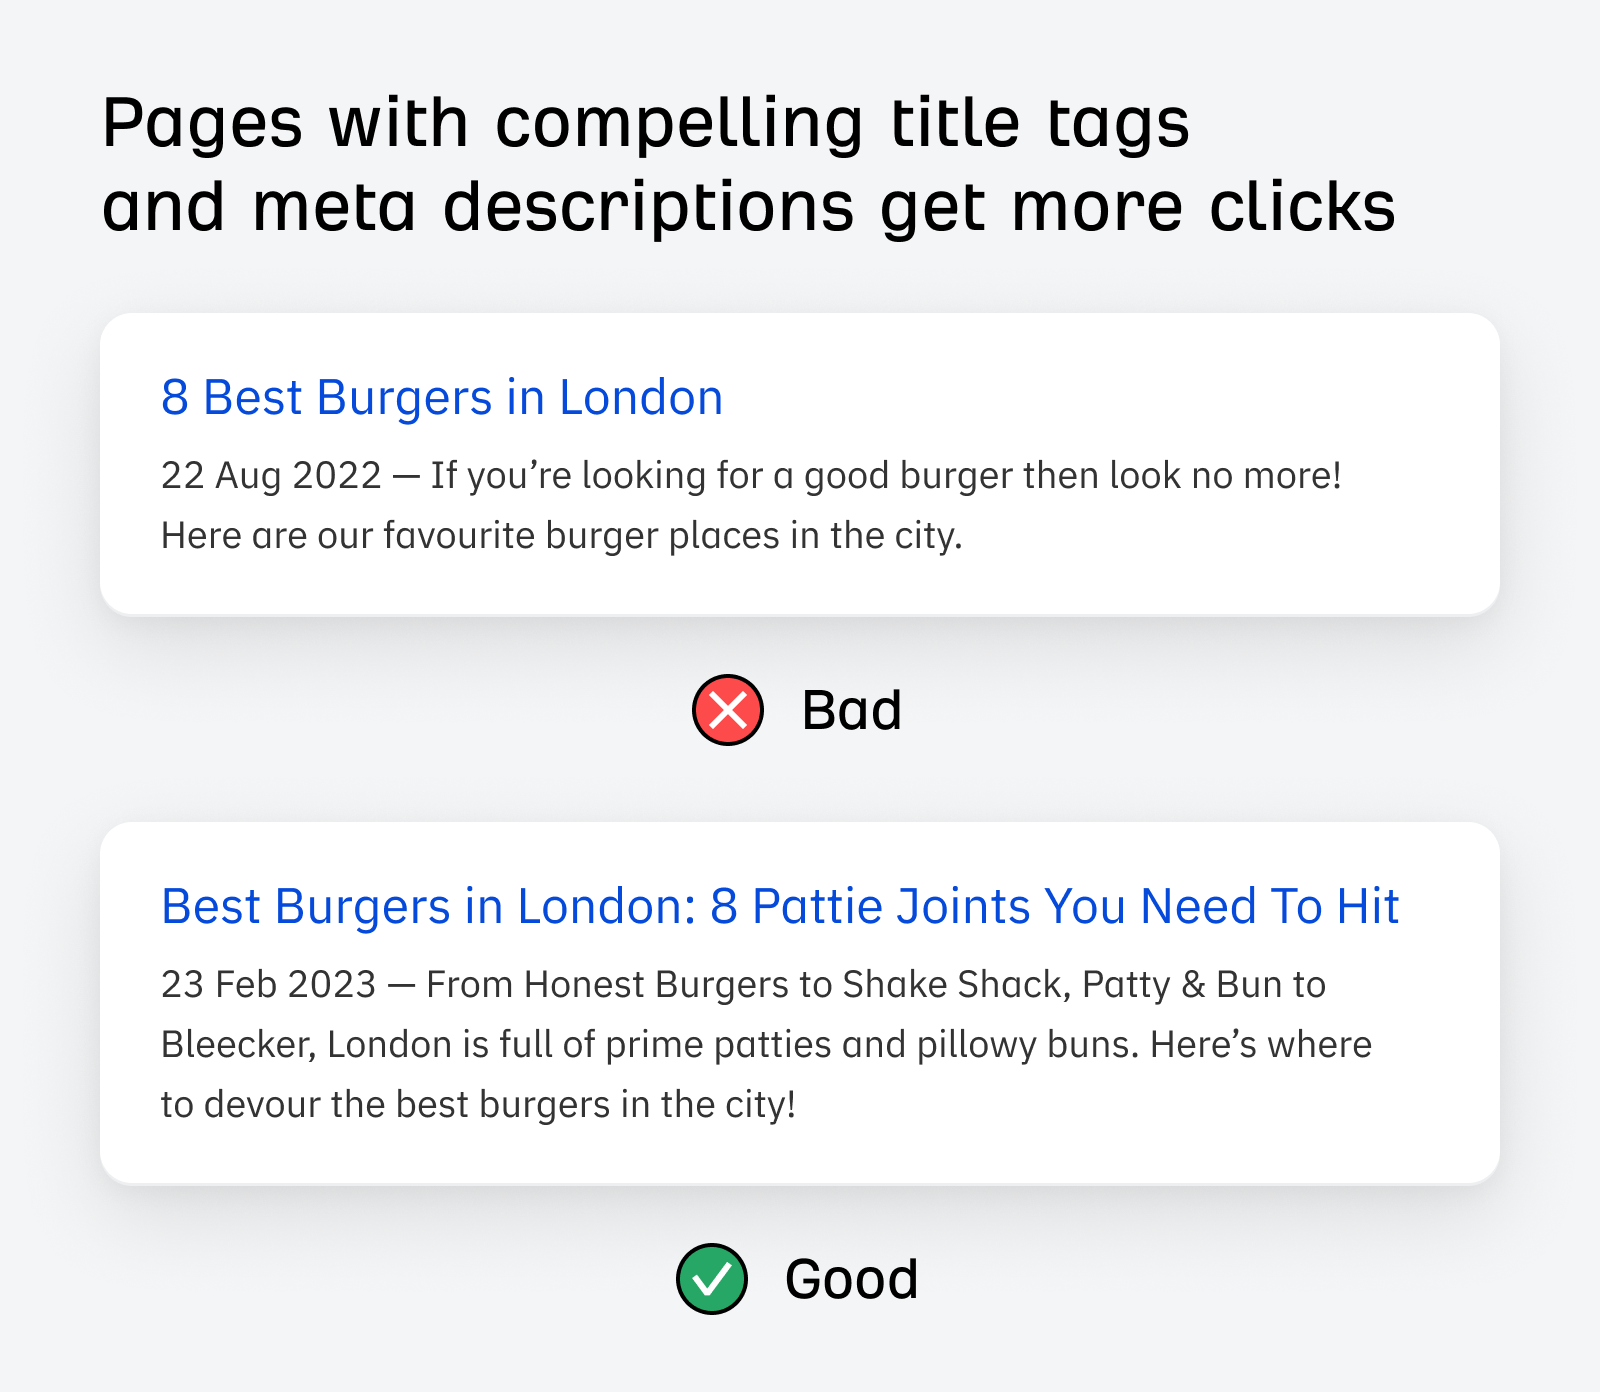 Pages with compelling title tags and meta descriptions get more clicks